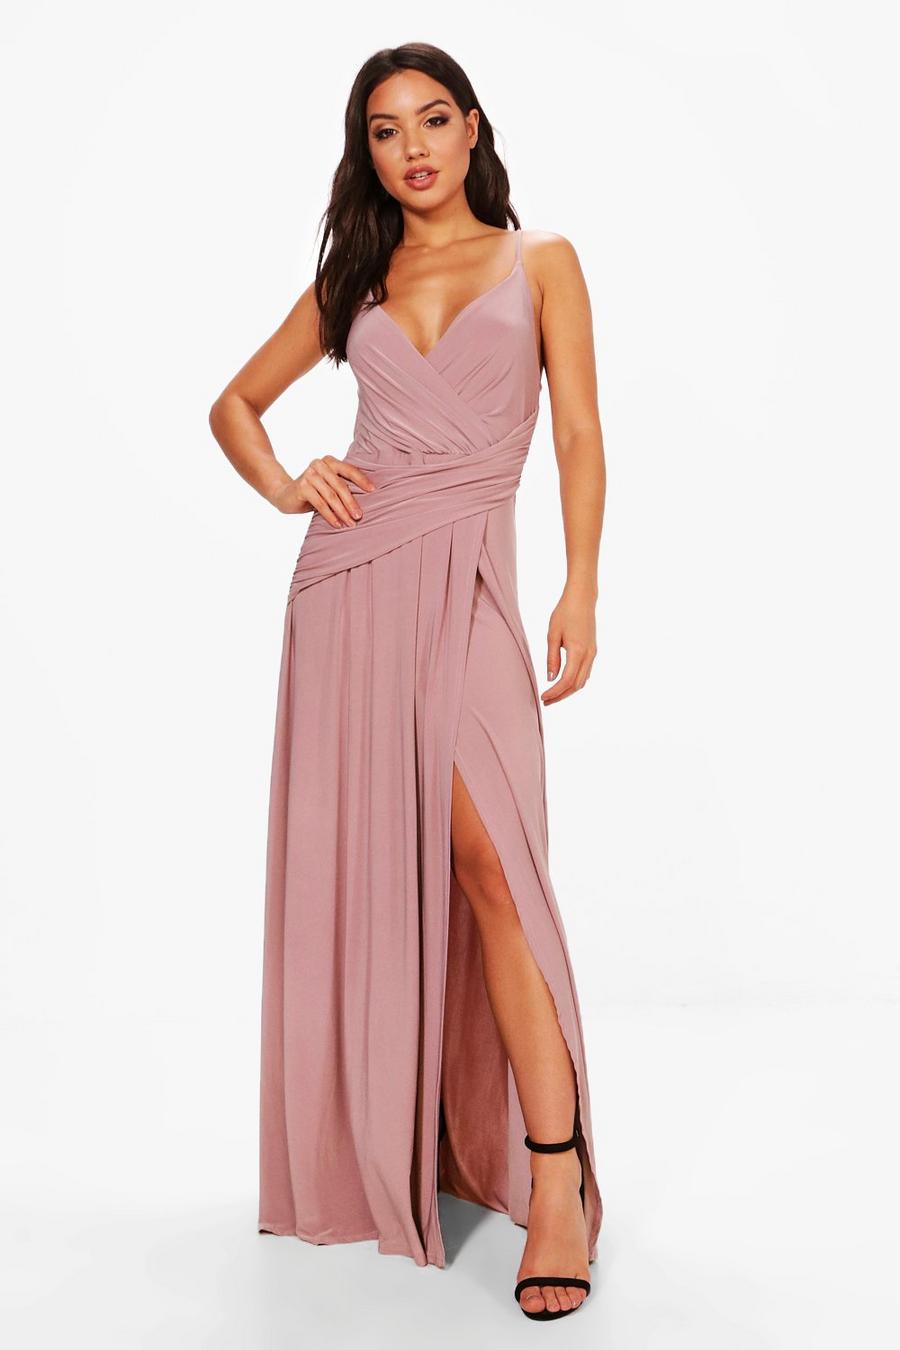 Mauve Slinky Wrap Ruched Strappy Maxi Bridesmaid Dress